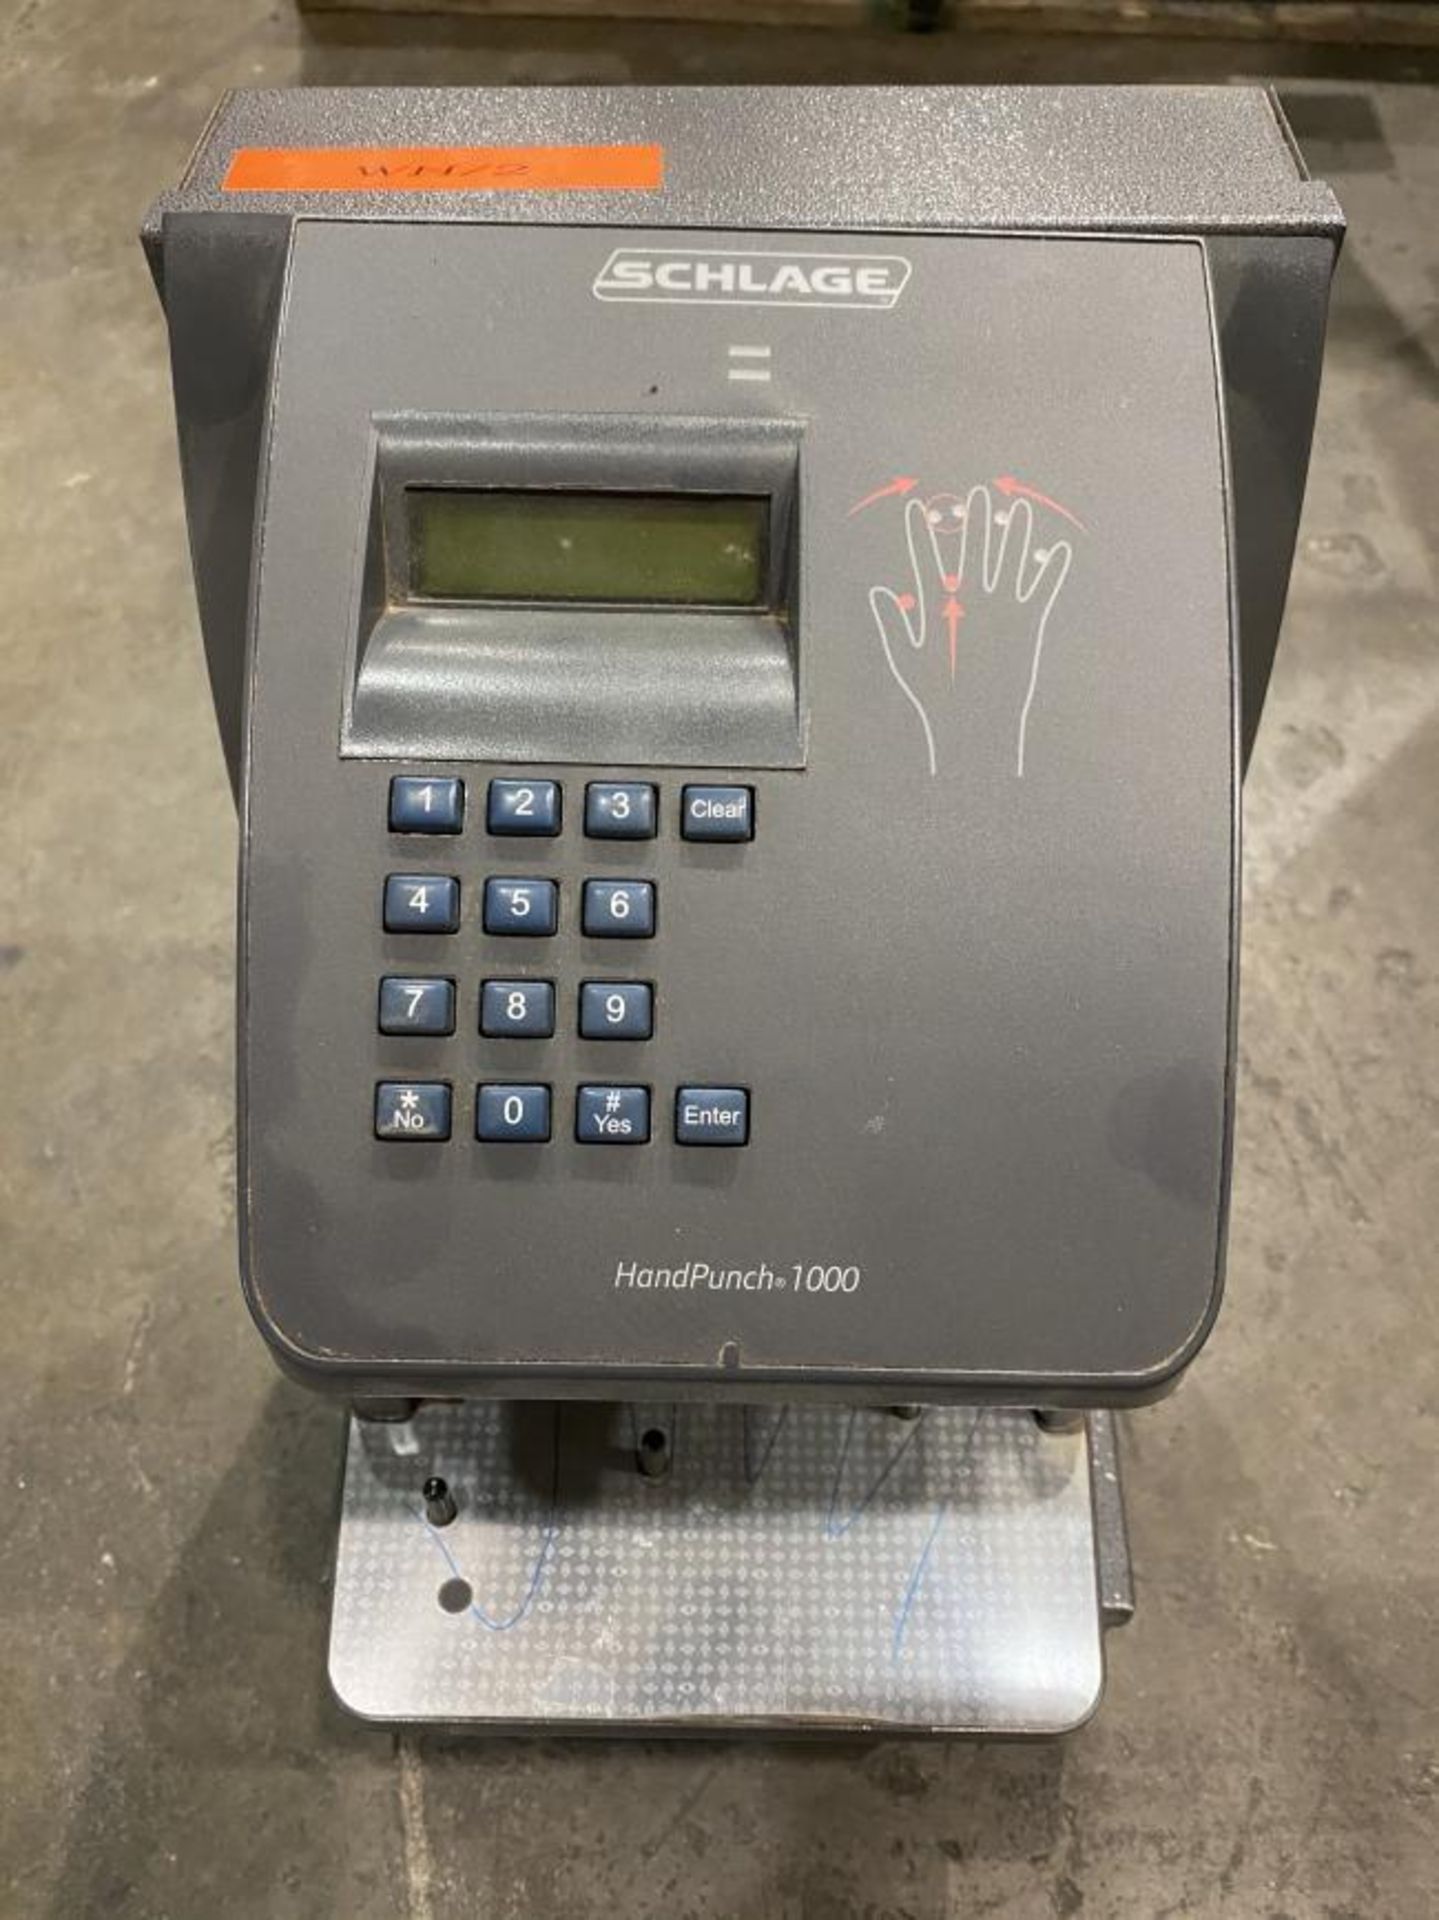 Schlage Hand Punch 1000 Biometric Time Clock